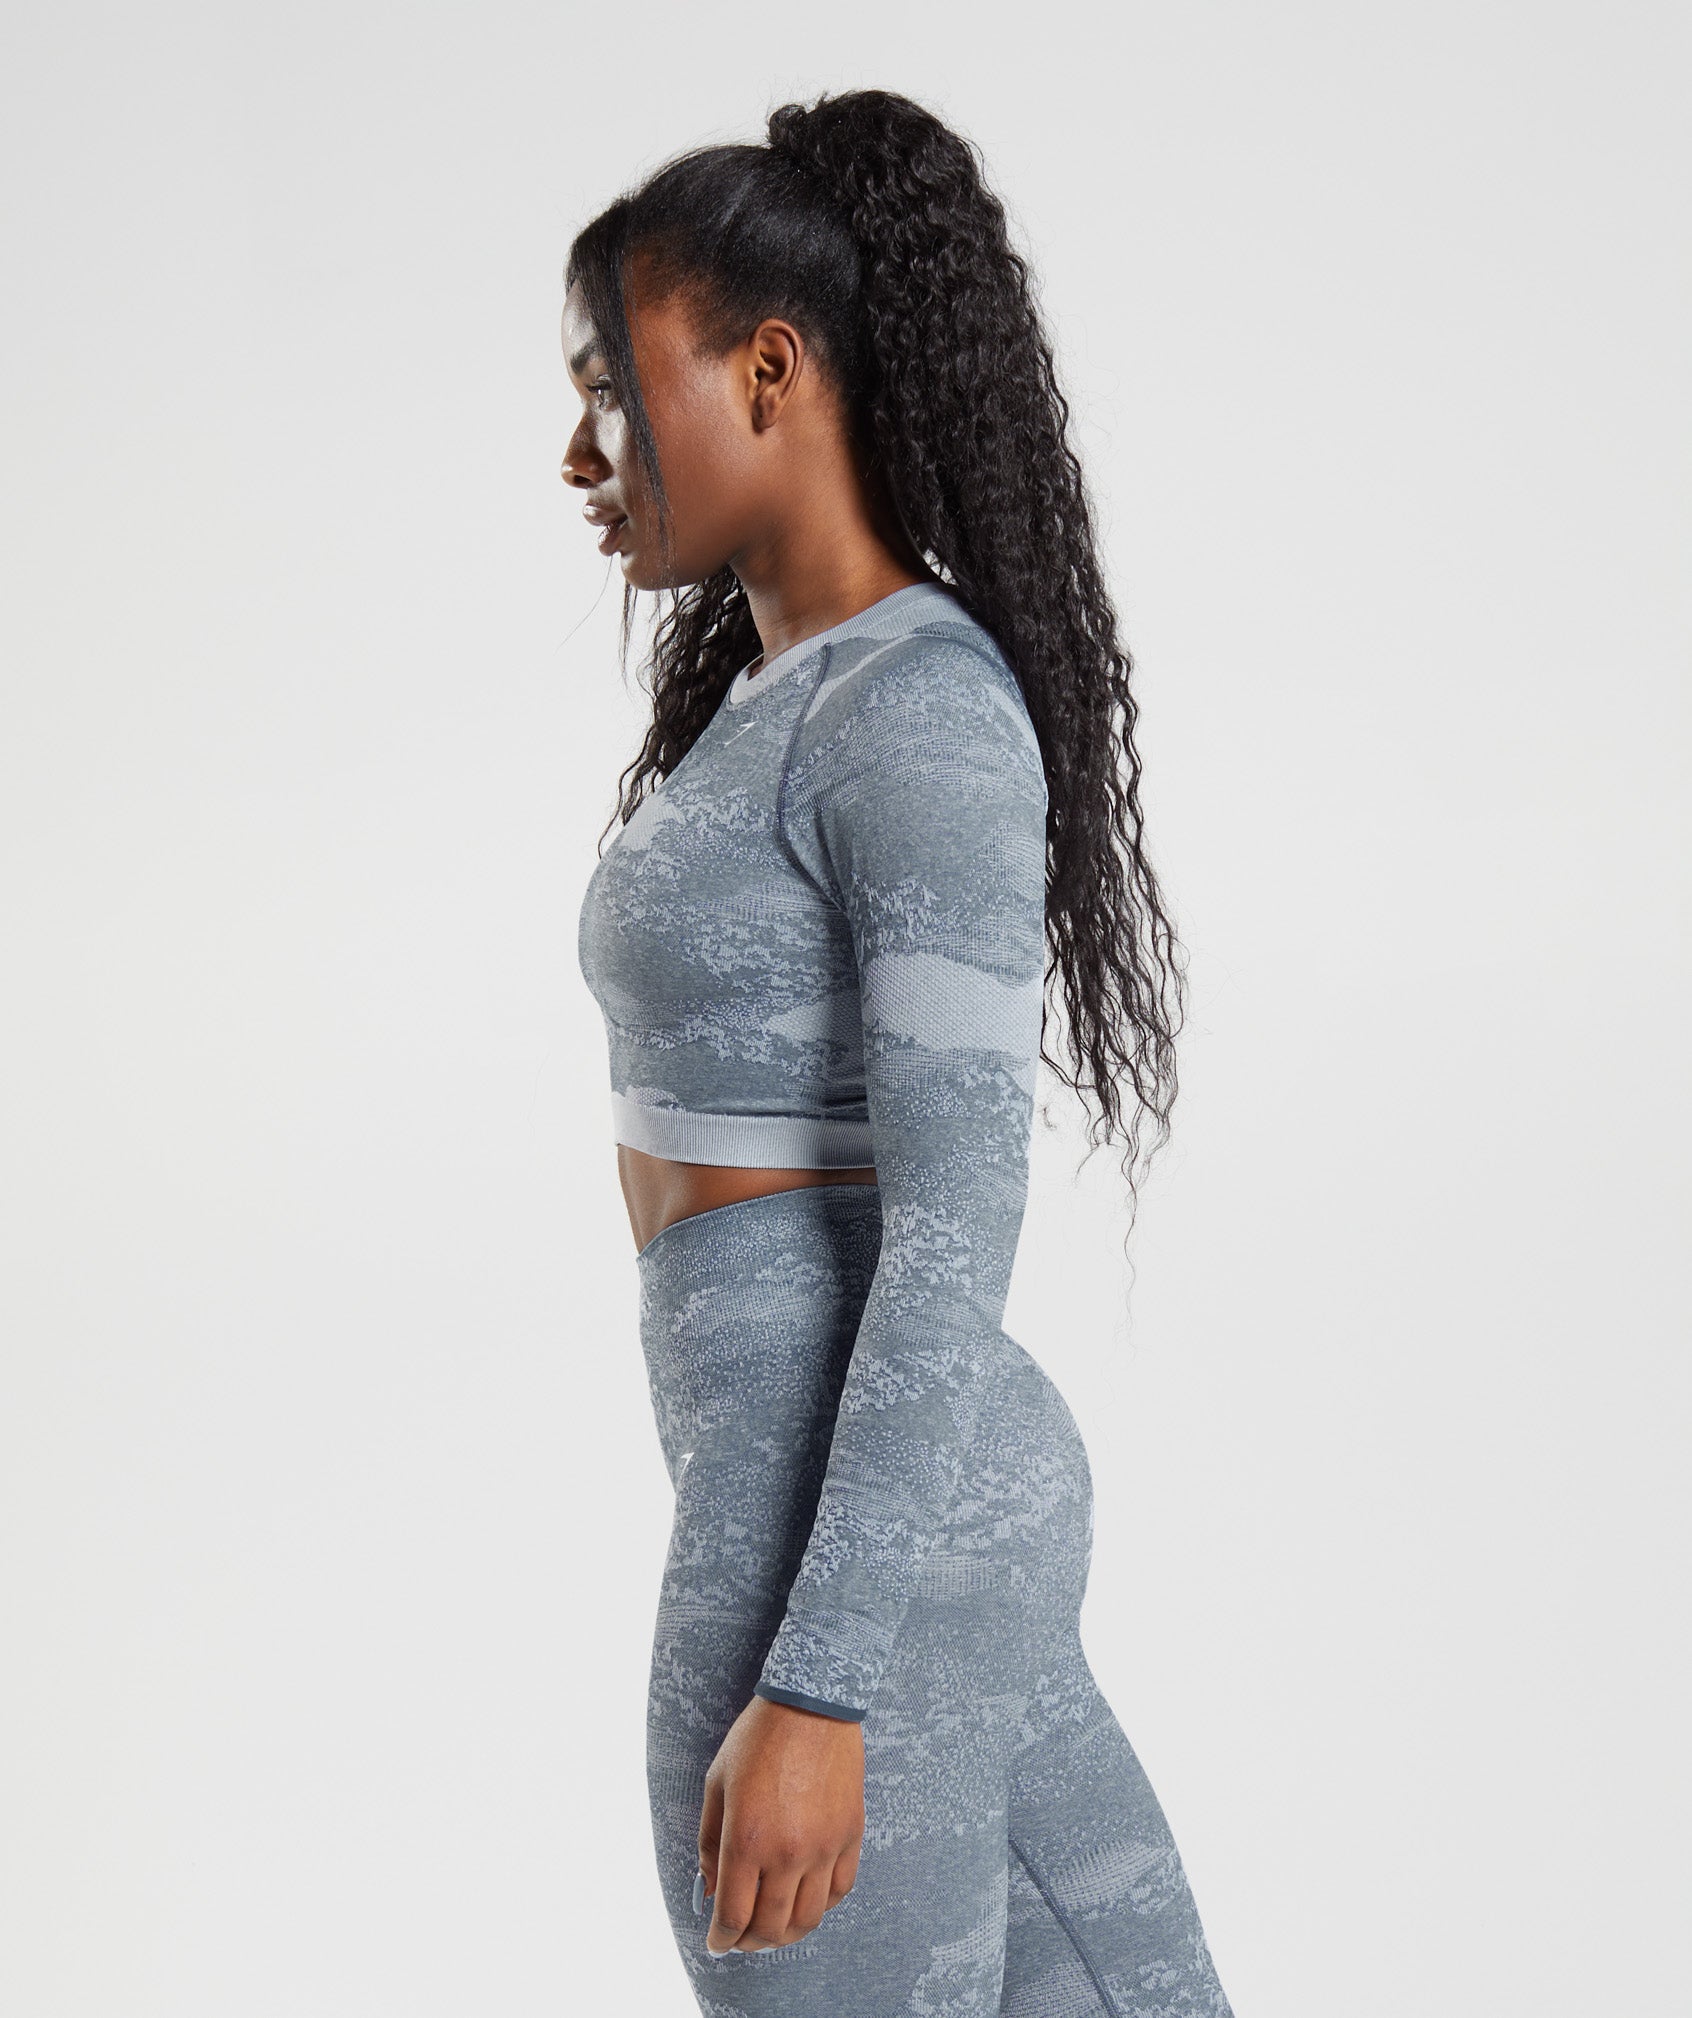 Adapt Camo Seamless Lace Up Back Top in River Stone Grey/Evening Blue - view 3